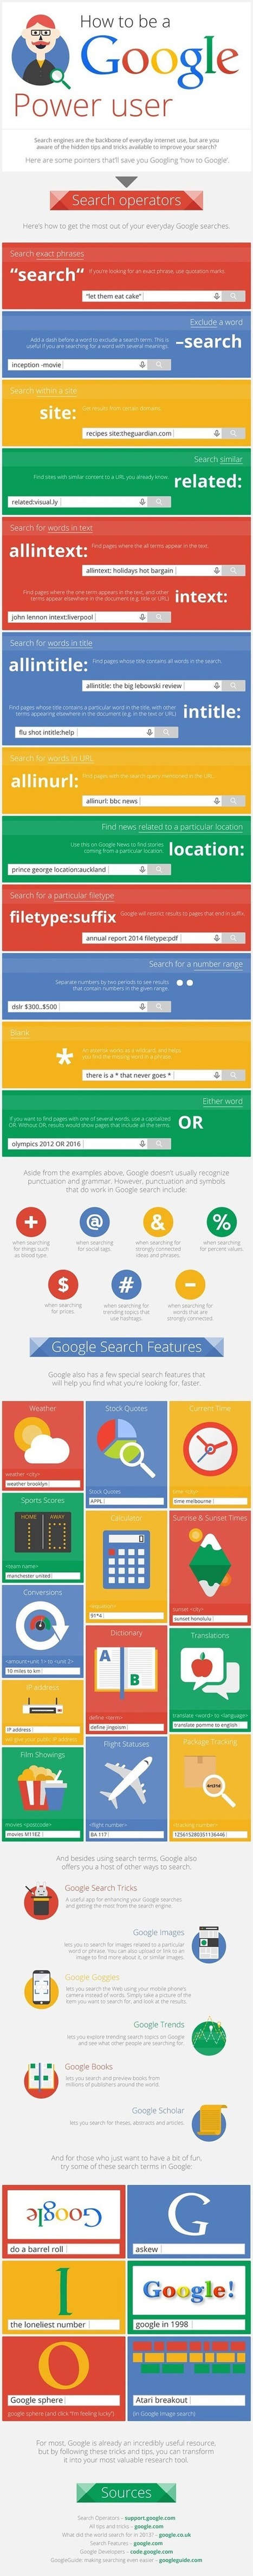 46 Hidden Tips and Tricks to Use Google Search Like a Boss: Infographic | information analyst | Scoop.it